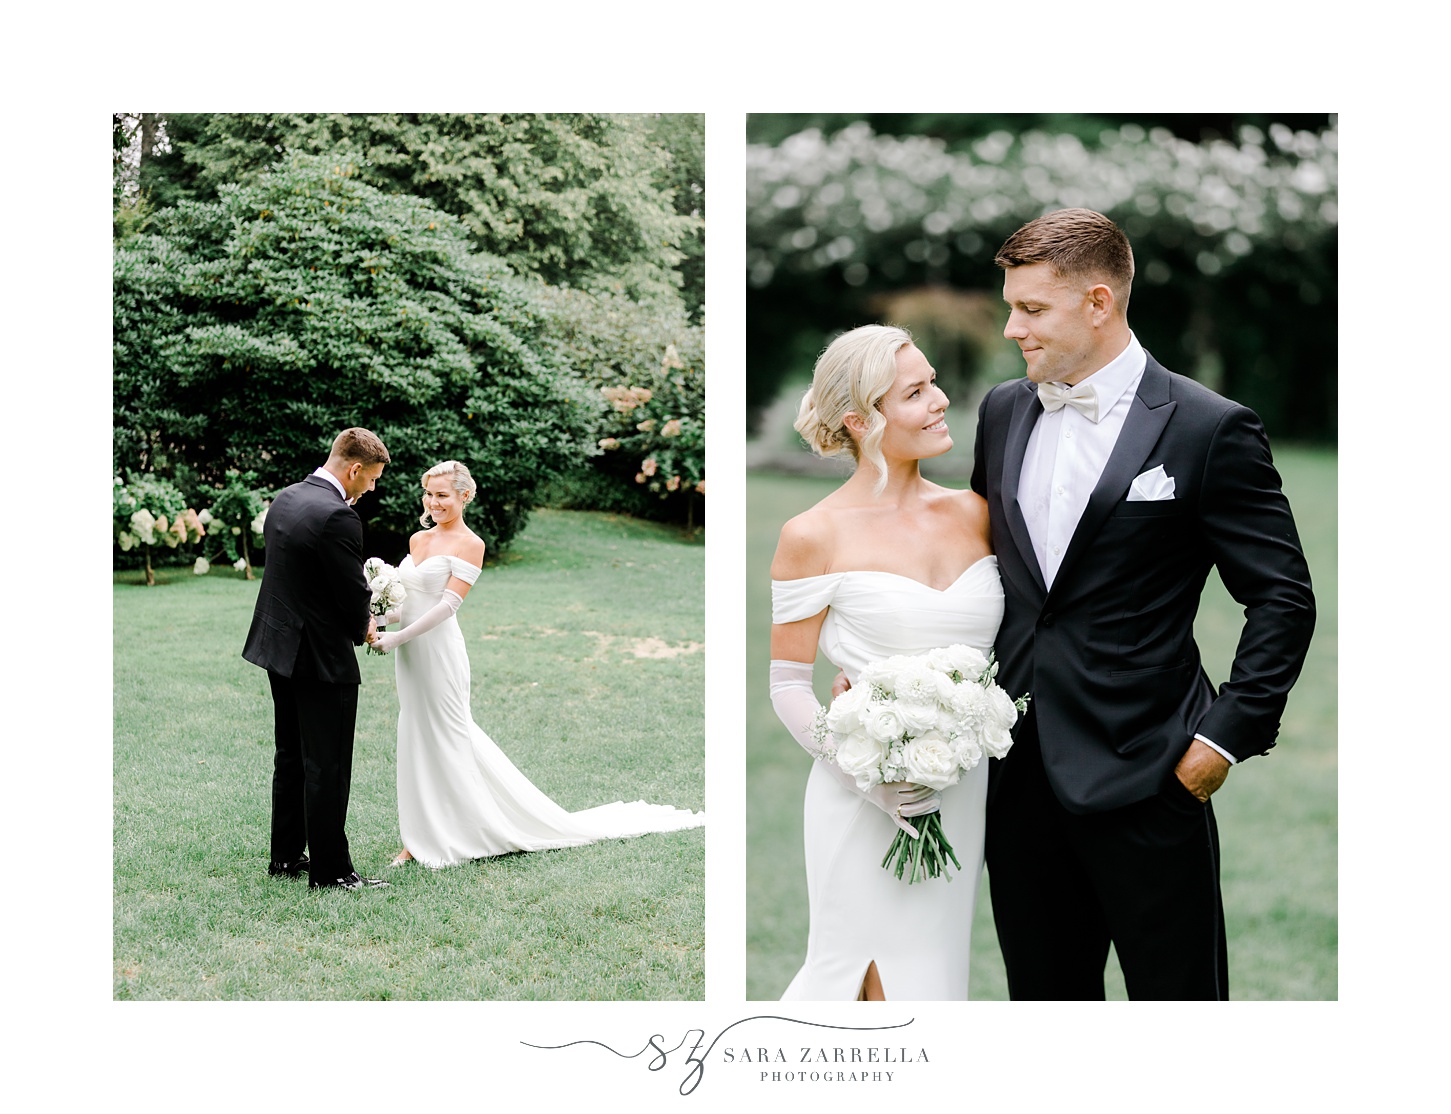 newlyweds hug on lawn at Glen Manor House during French chateau inspired wedding day